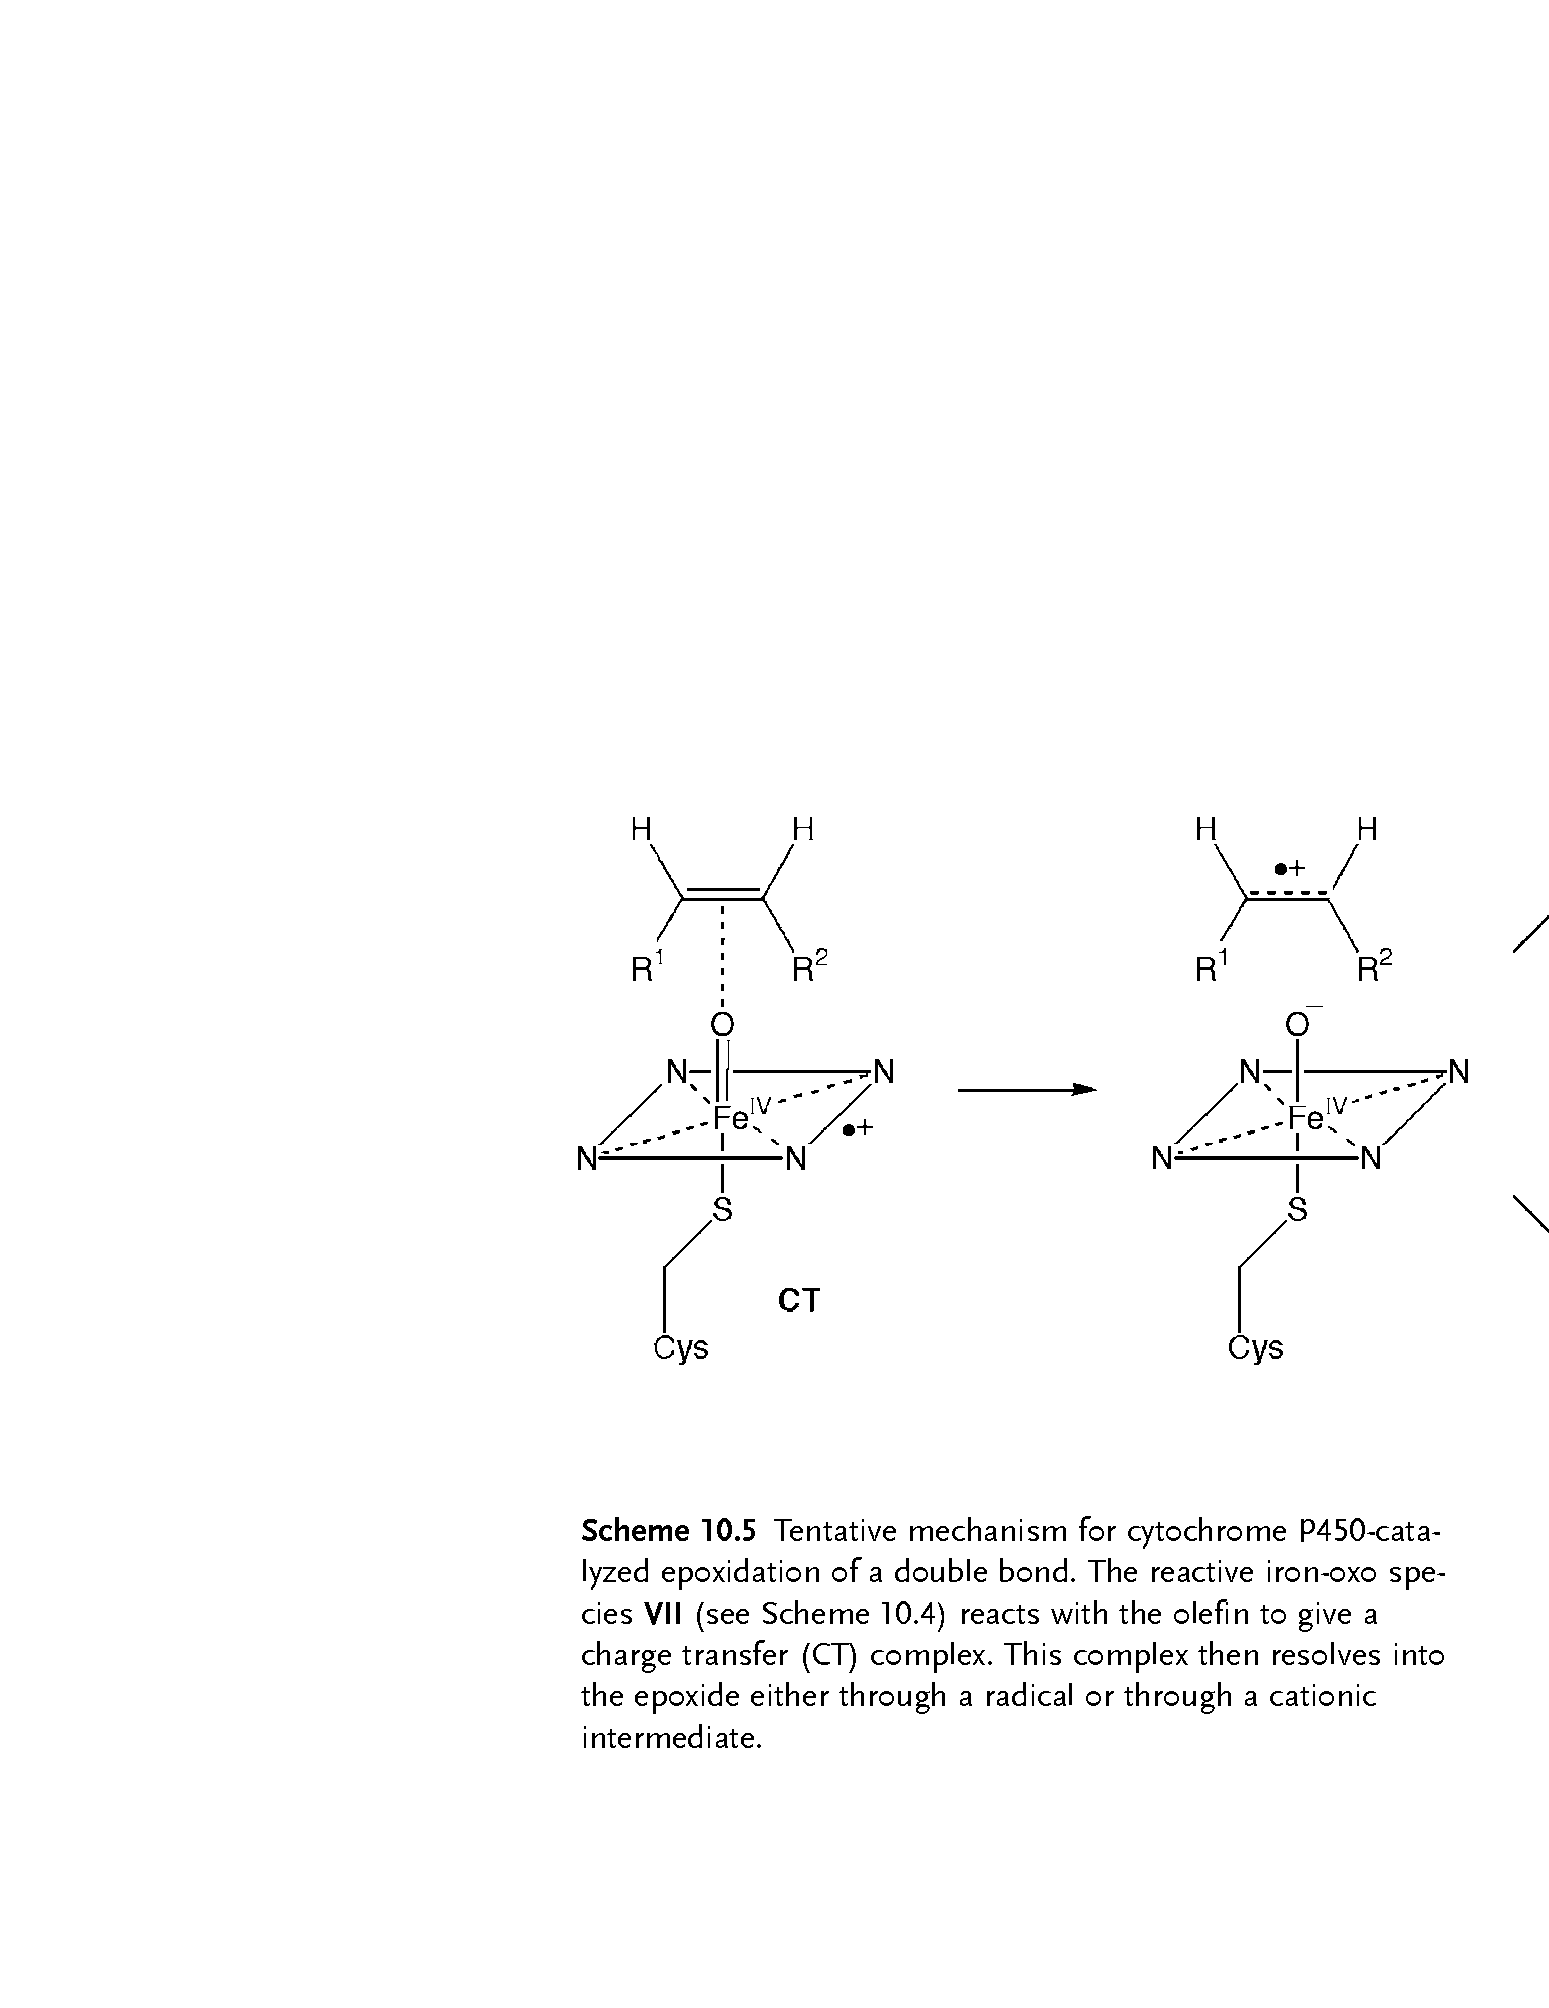 Scheme 10.5 Tentative mechanism for cytochrome P450-cata-lyzed epoxidation of a double bond. The reactive iron-oxo species VII (see Scheme 10.4) reacts with the olefin to give a charge transfer (CT) complex. This complex then resolves into the epoxide either through a radical or through a cationic intermediate.